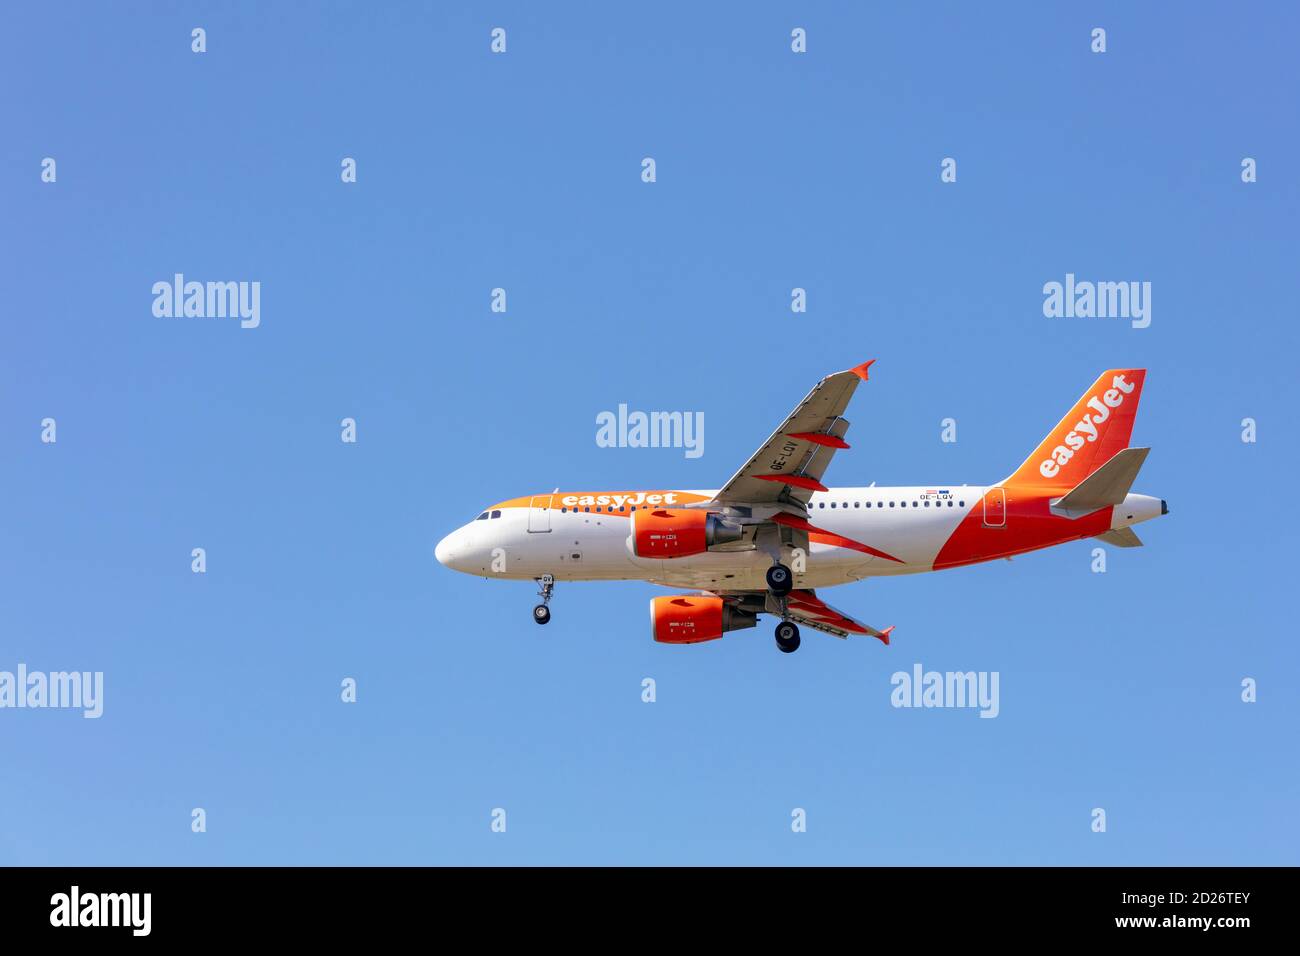 An Easyjet Europe Airbus A319-100 with landing gear down. Stock Photo